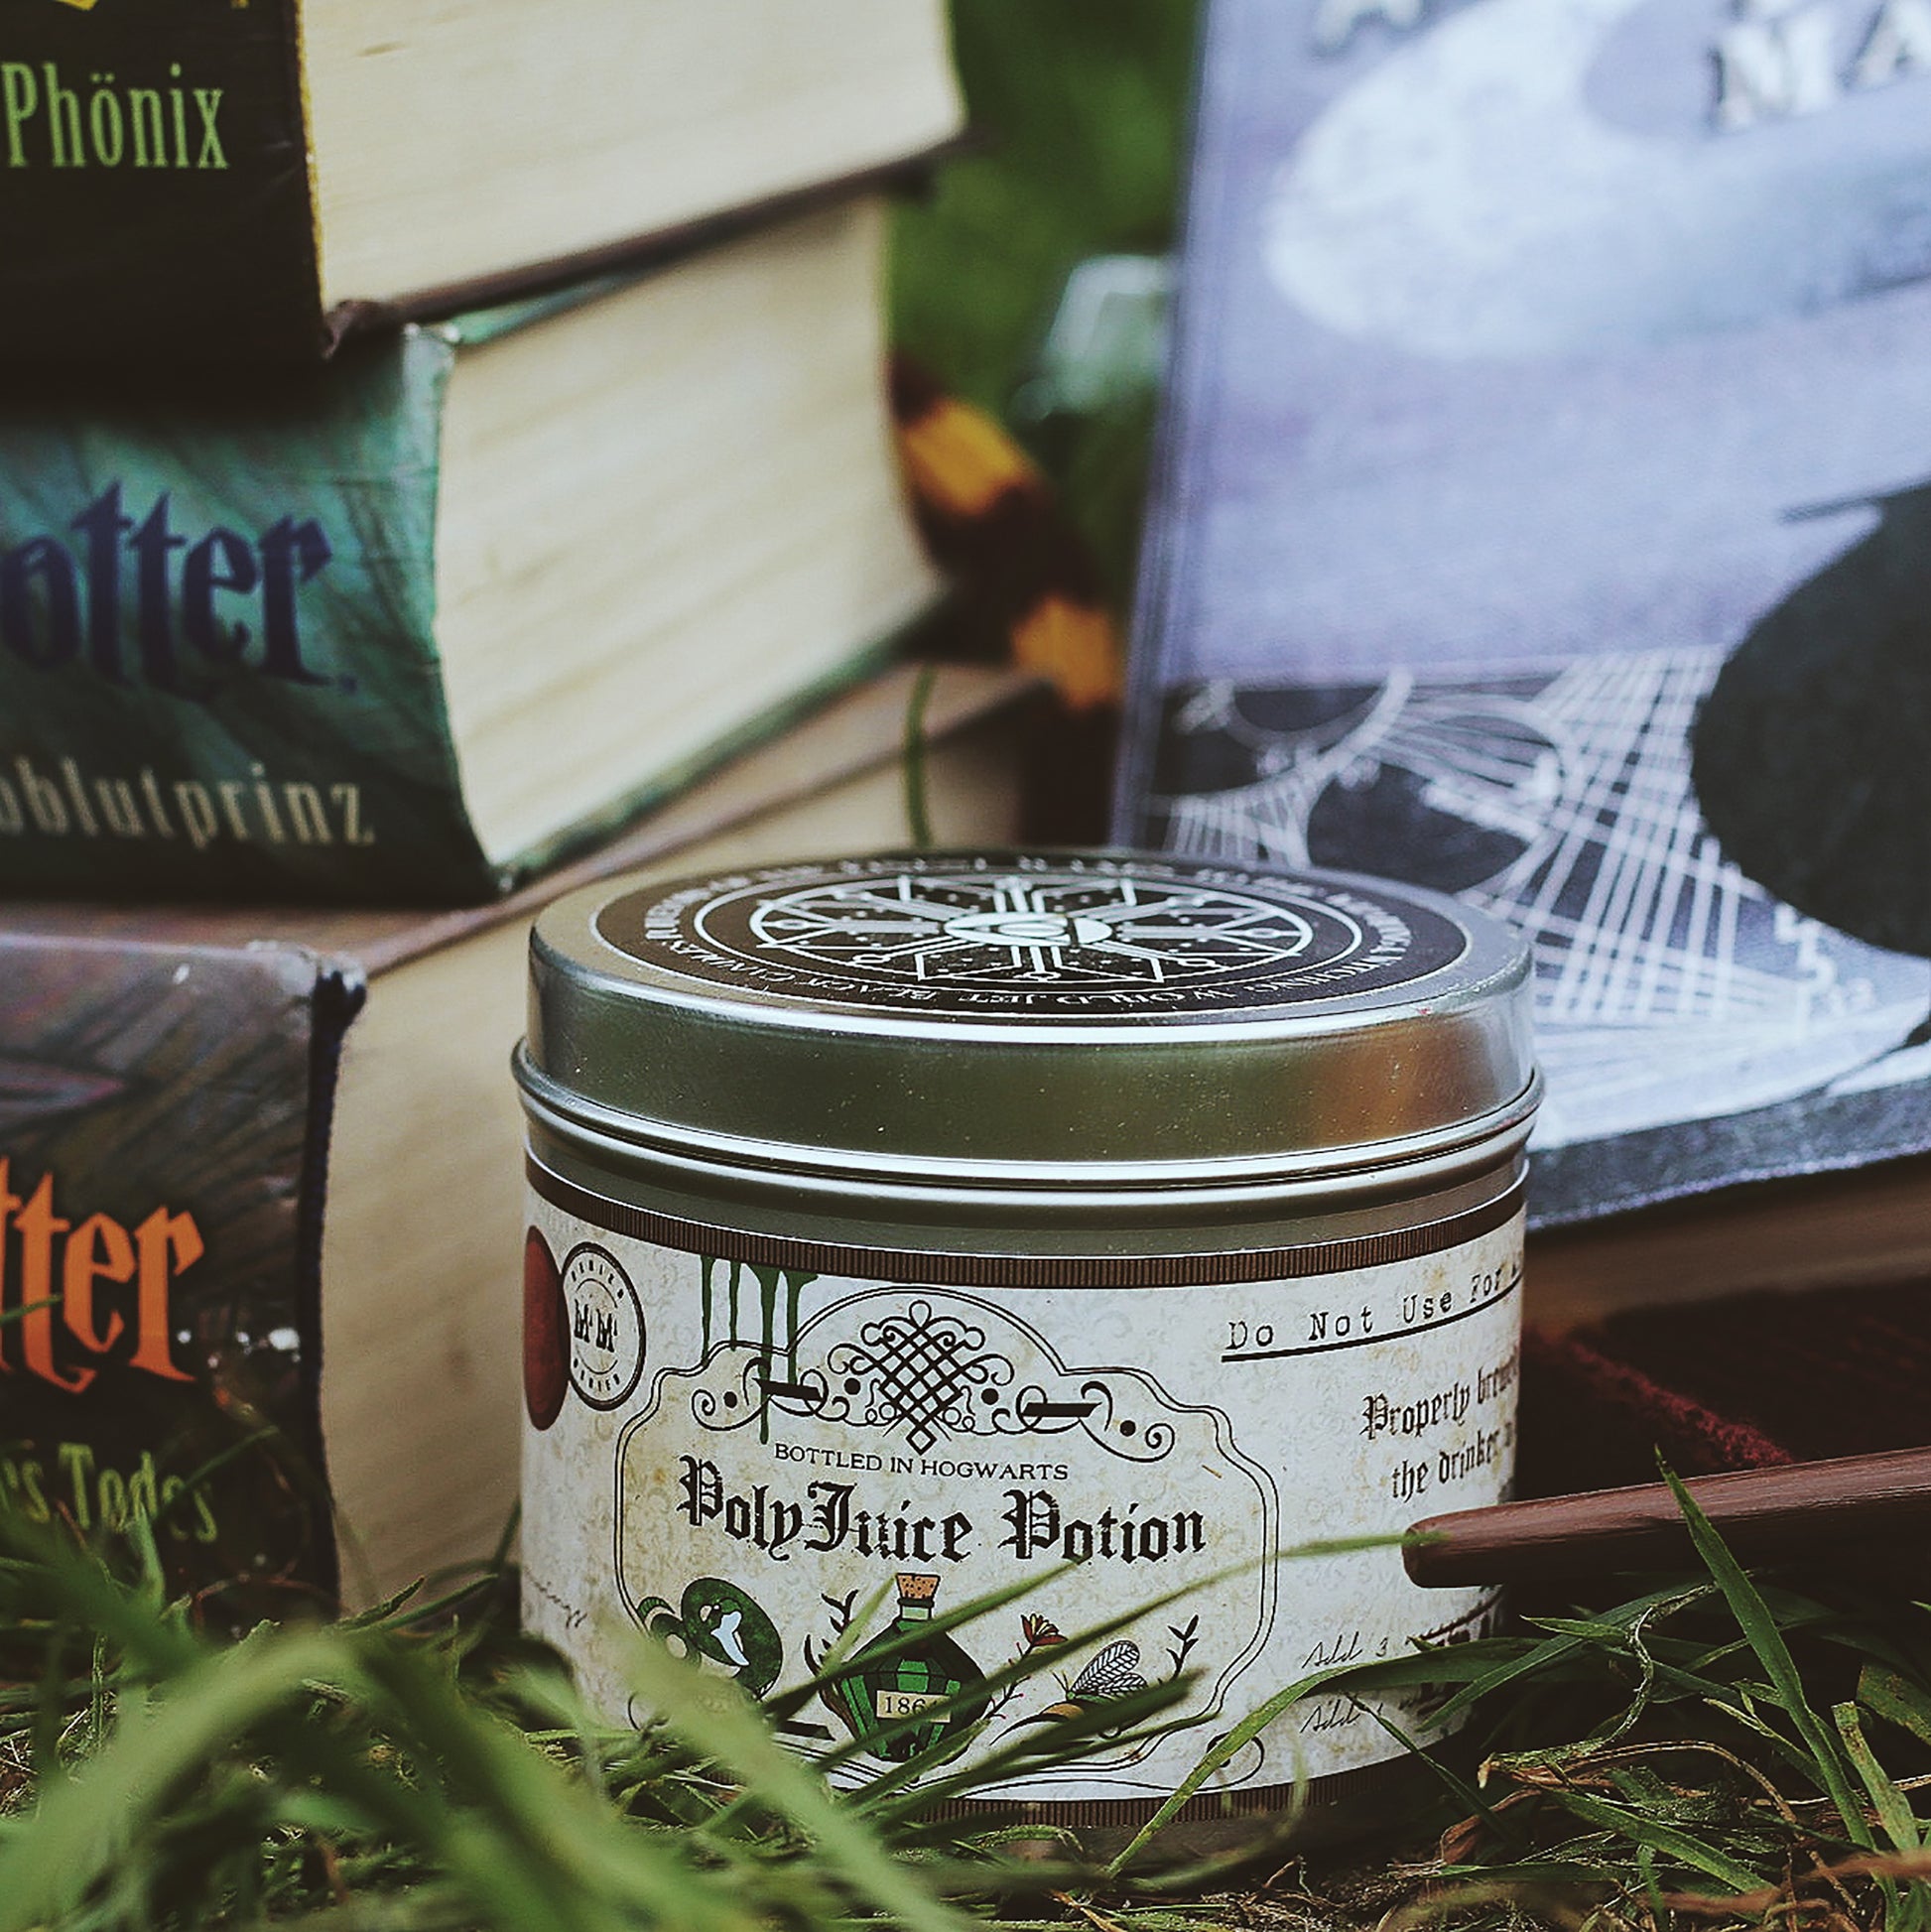 Happy Piranha's polyjuice potion candle in the grass with books.